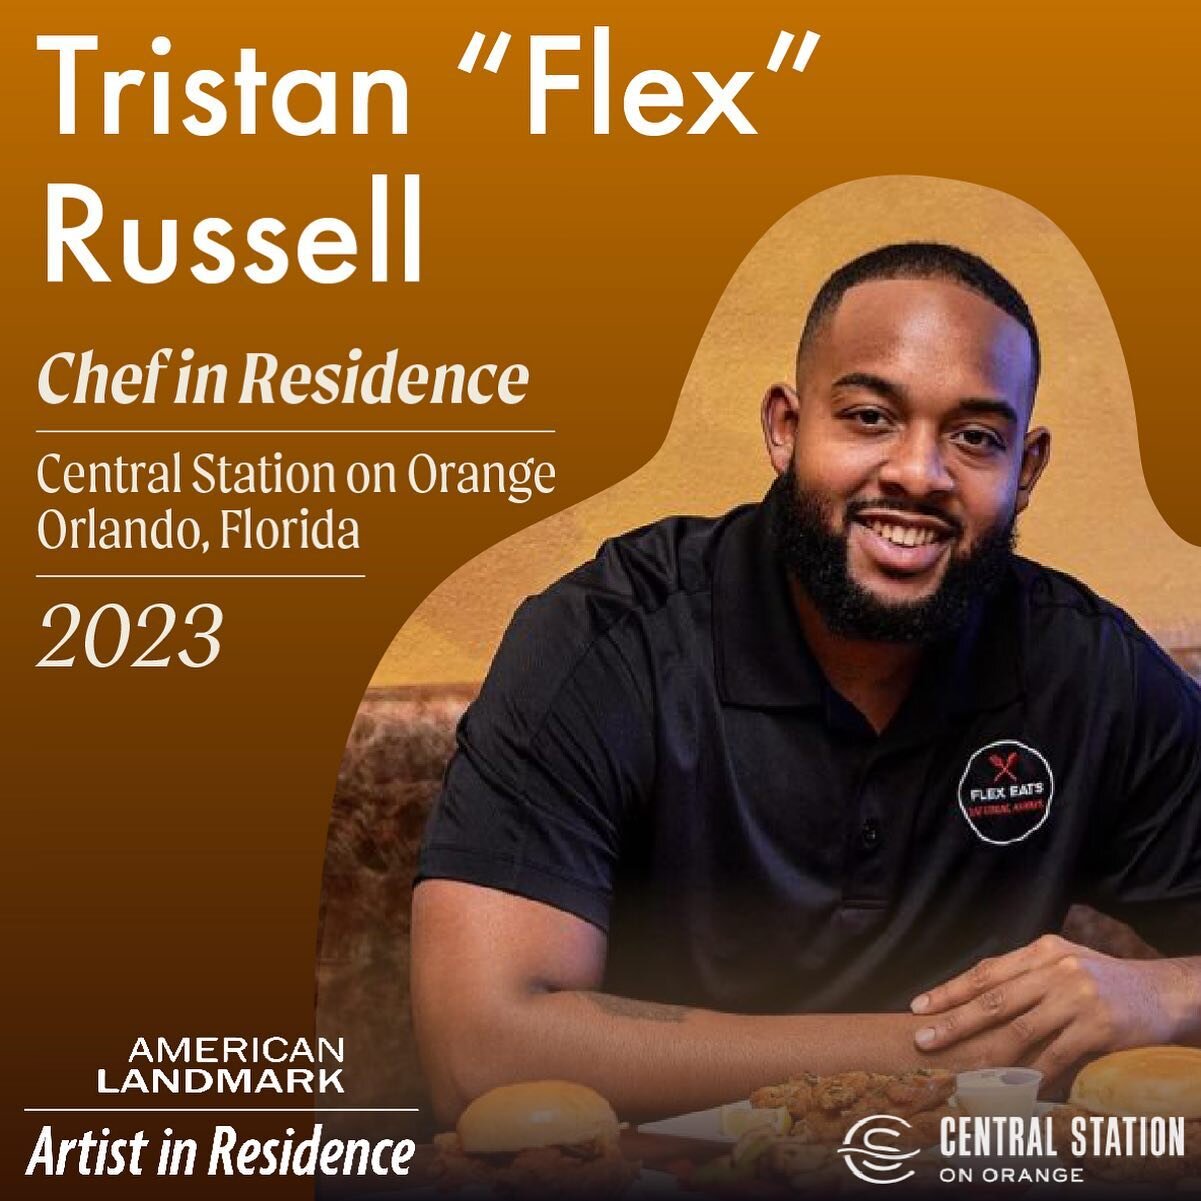 American Landmark: Artists in Residence is pleased to introduce Orlando-based chef and content creator, Tristan Russell, as our newest resident *culinary* artist. Better known as &ldquo;Flex&rdquo; or by his business name, Flex Eatss, he started his 